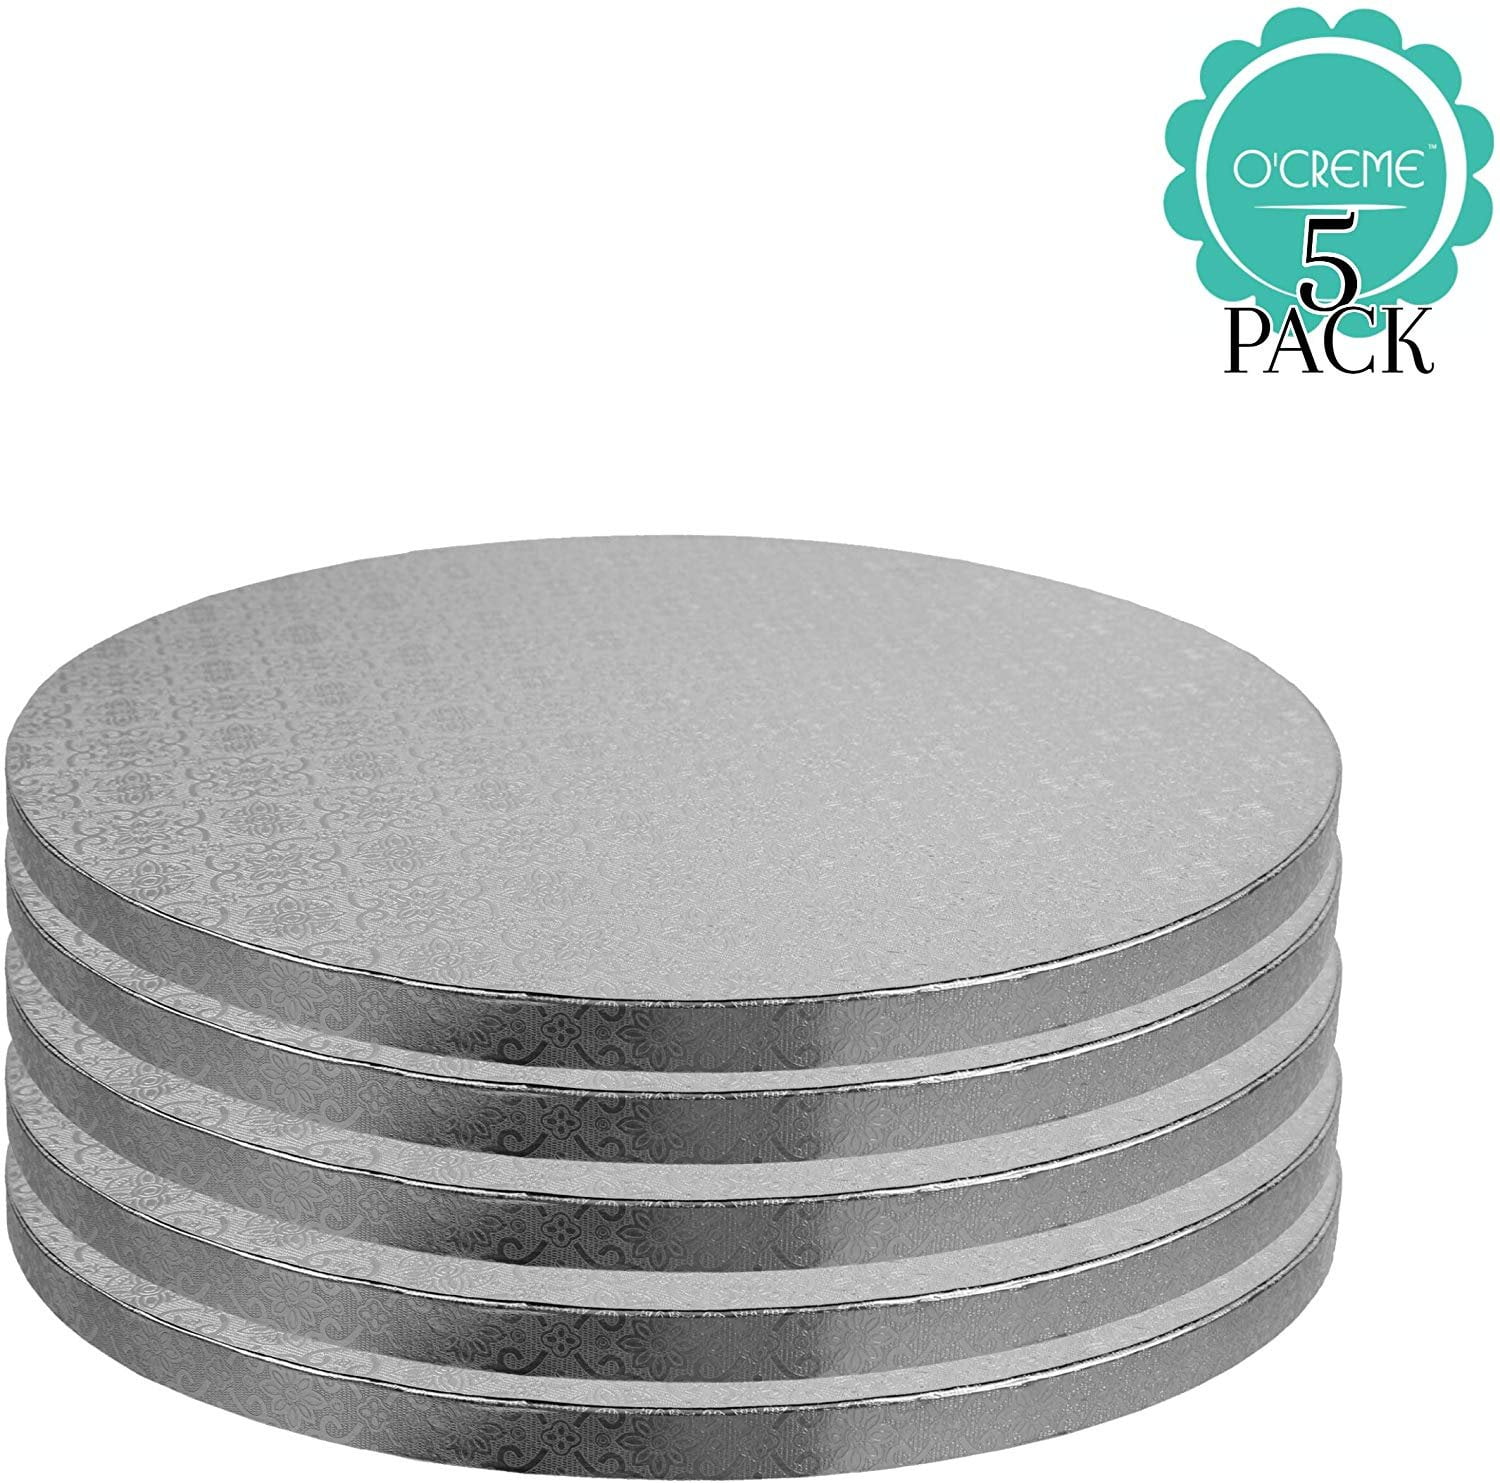 Spec101 Acrylic Cake Disc 6.5in 2 Pack - Round Acrylic Disc Set - 1/8in Thick